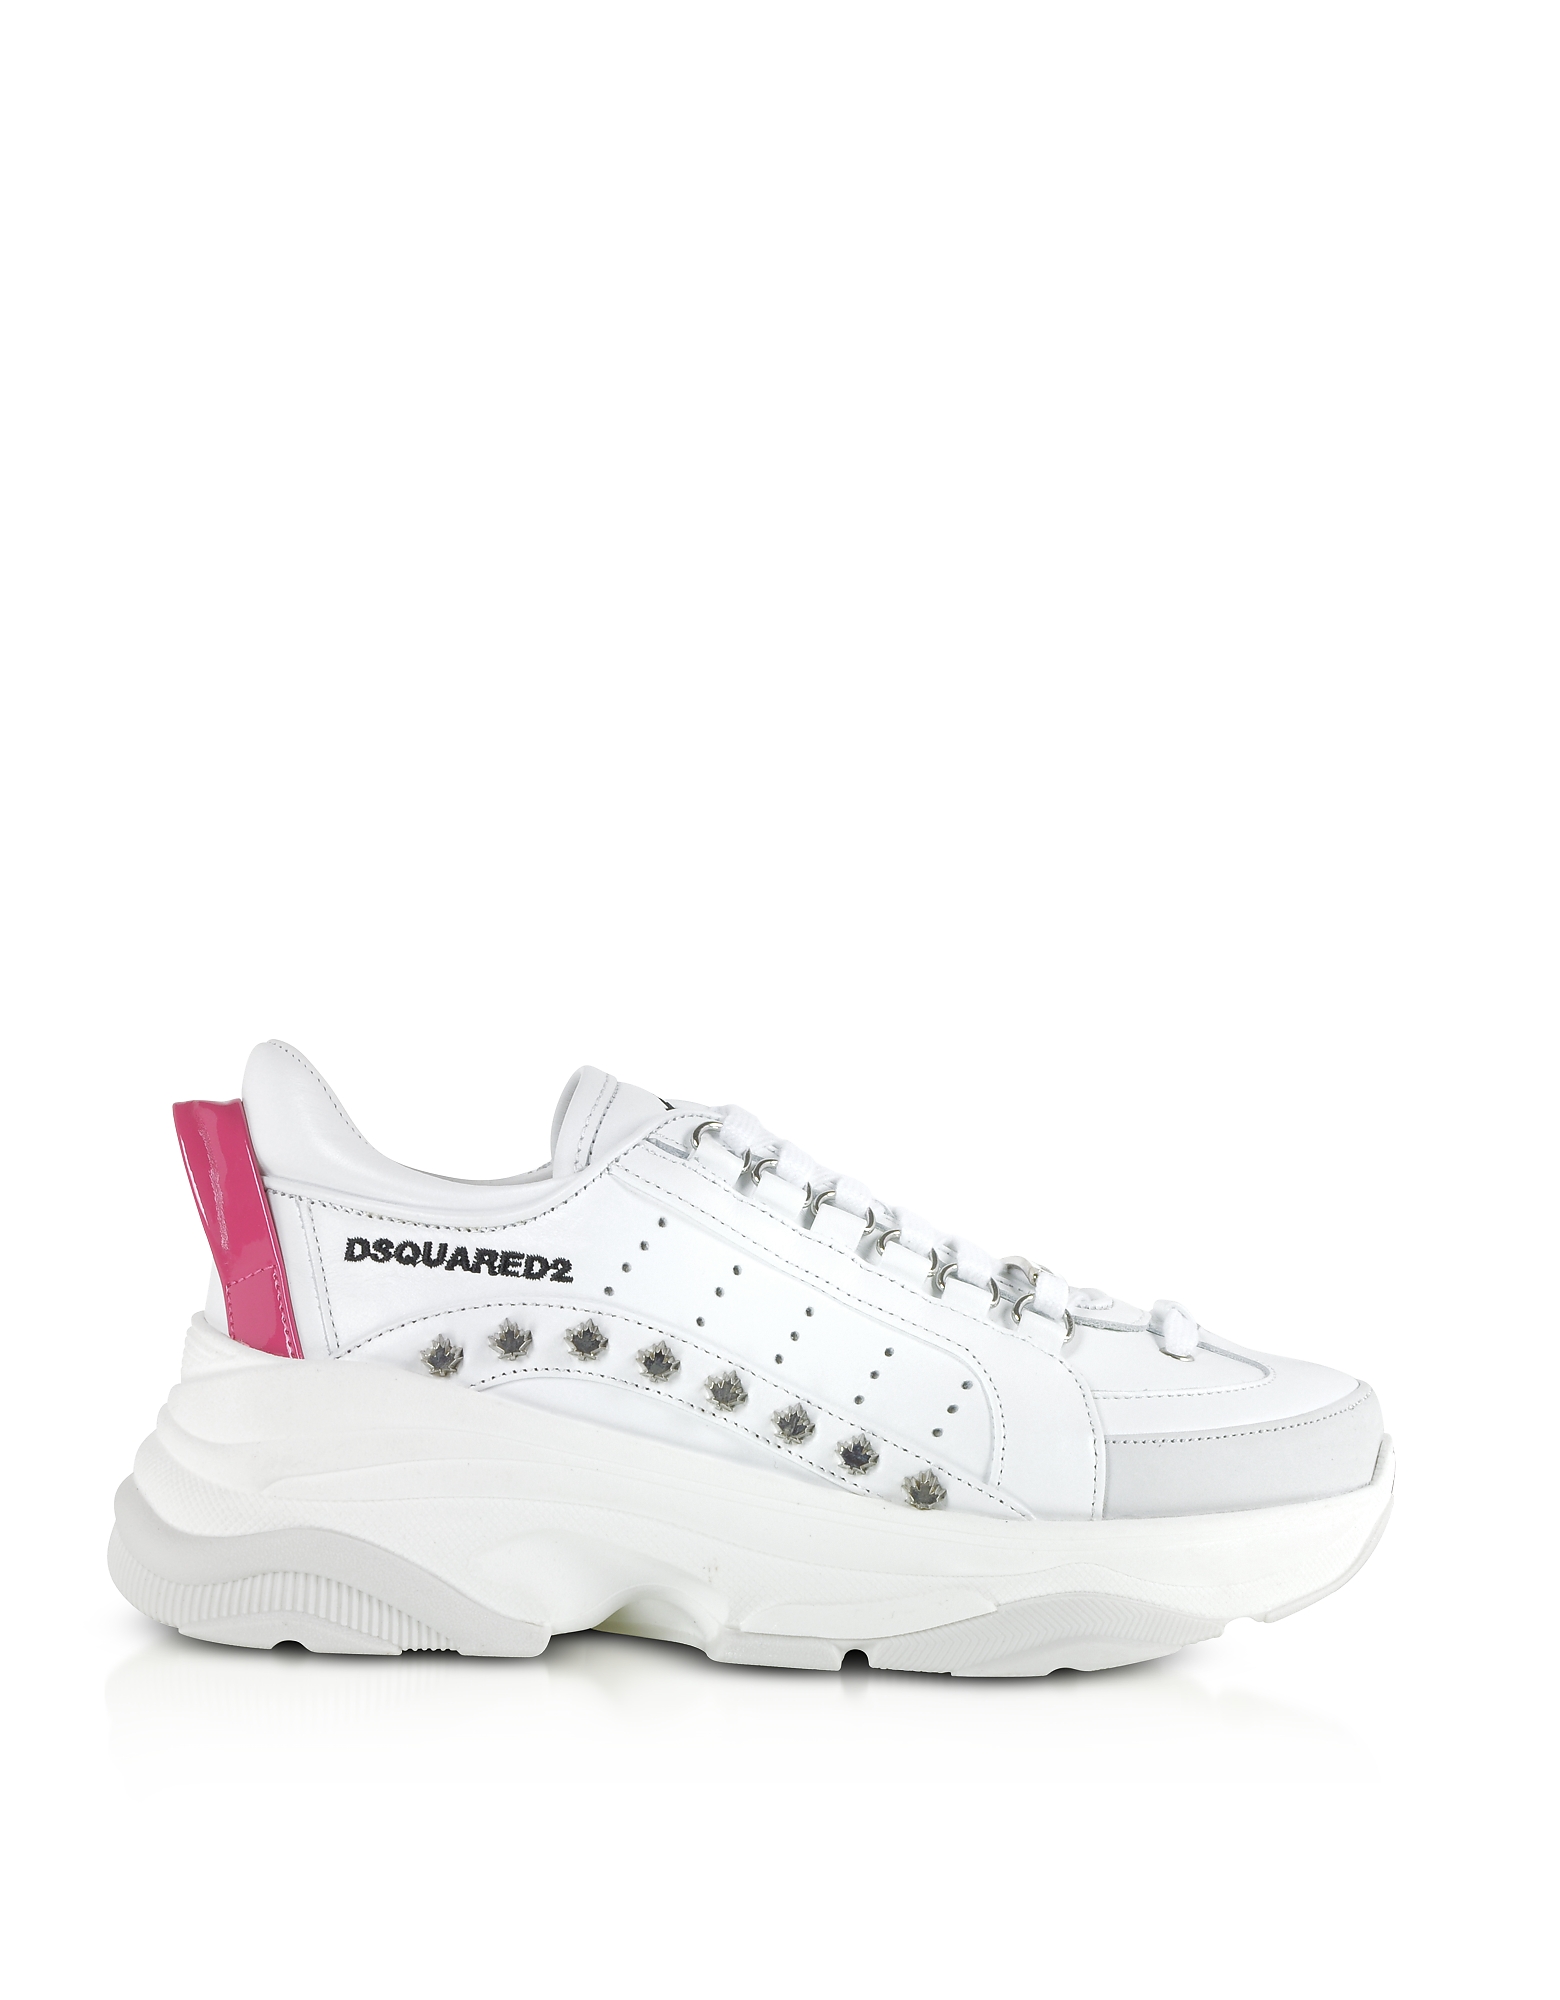 DSquared2 Designer Shoes, Bumpy 551 Studded Calf Leather Women's Sneakers